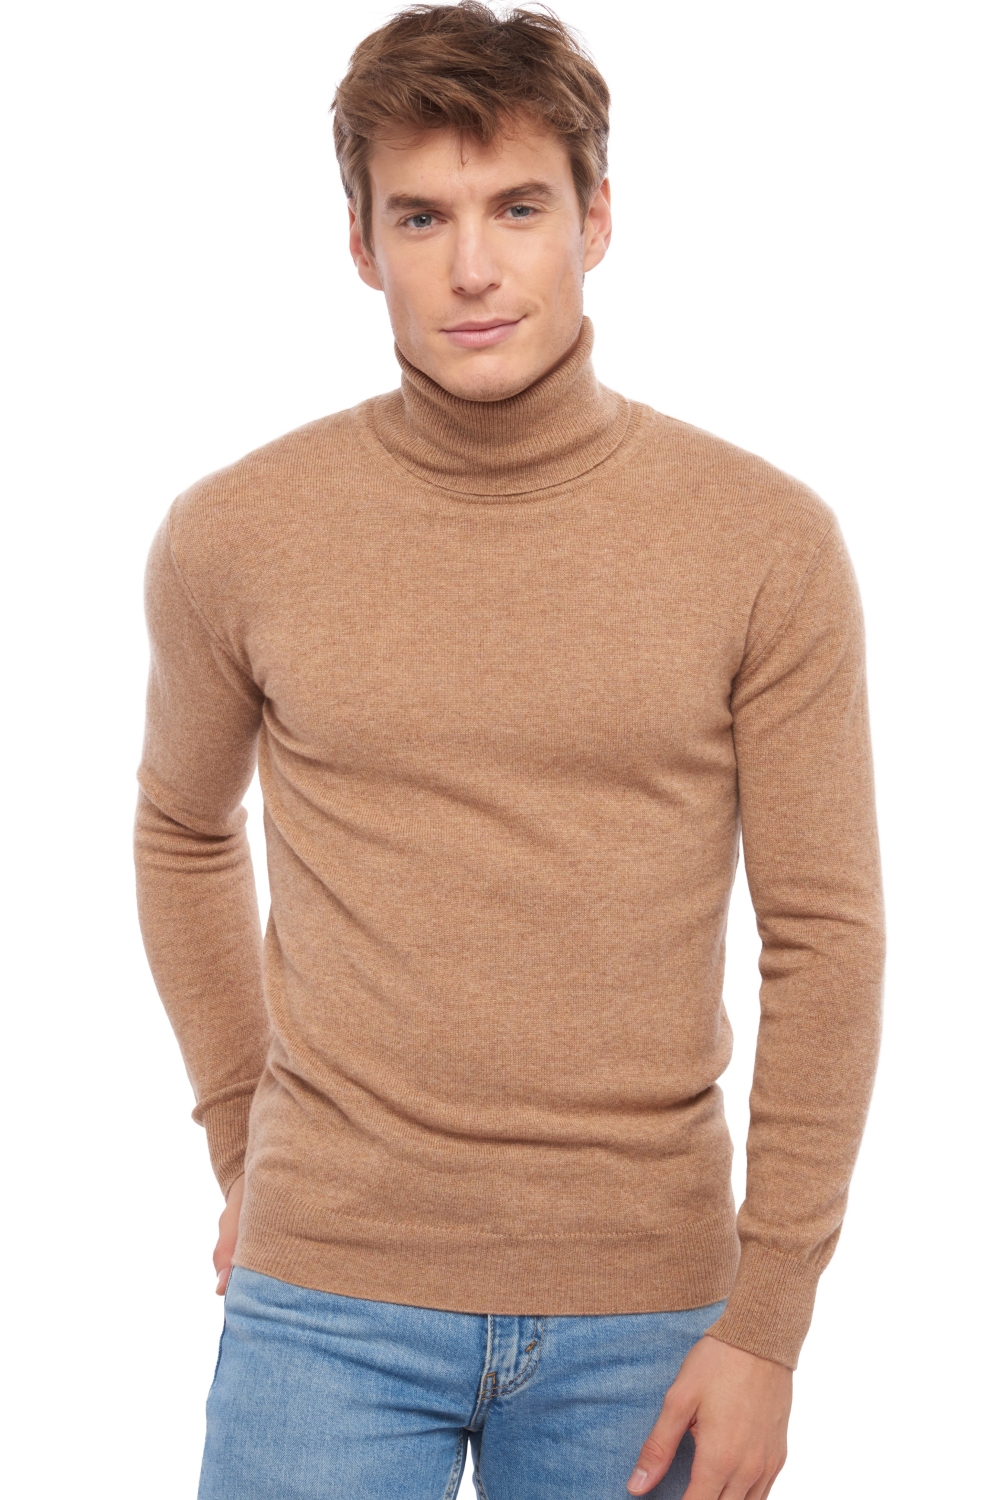 Cachemire pull homme col roule preston camel chine 3xl